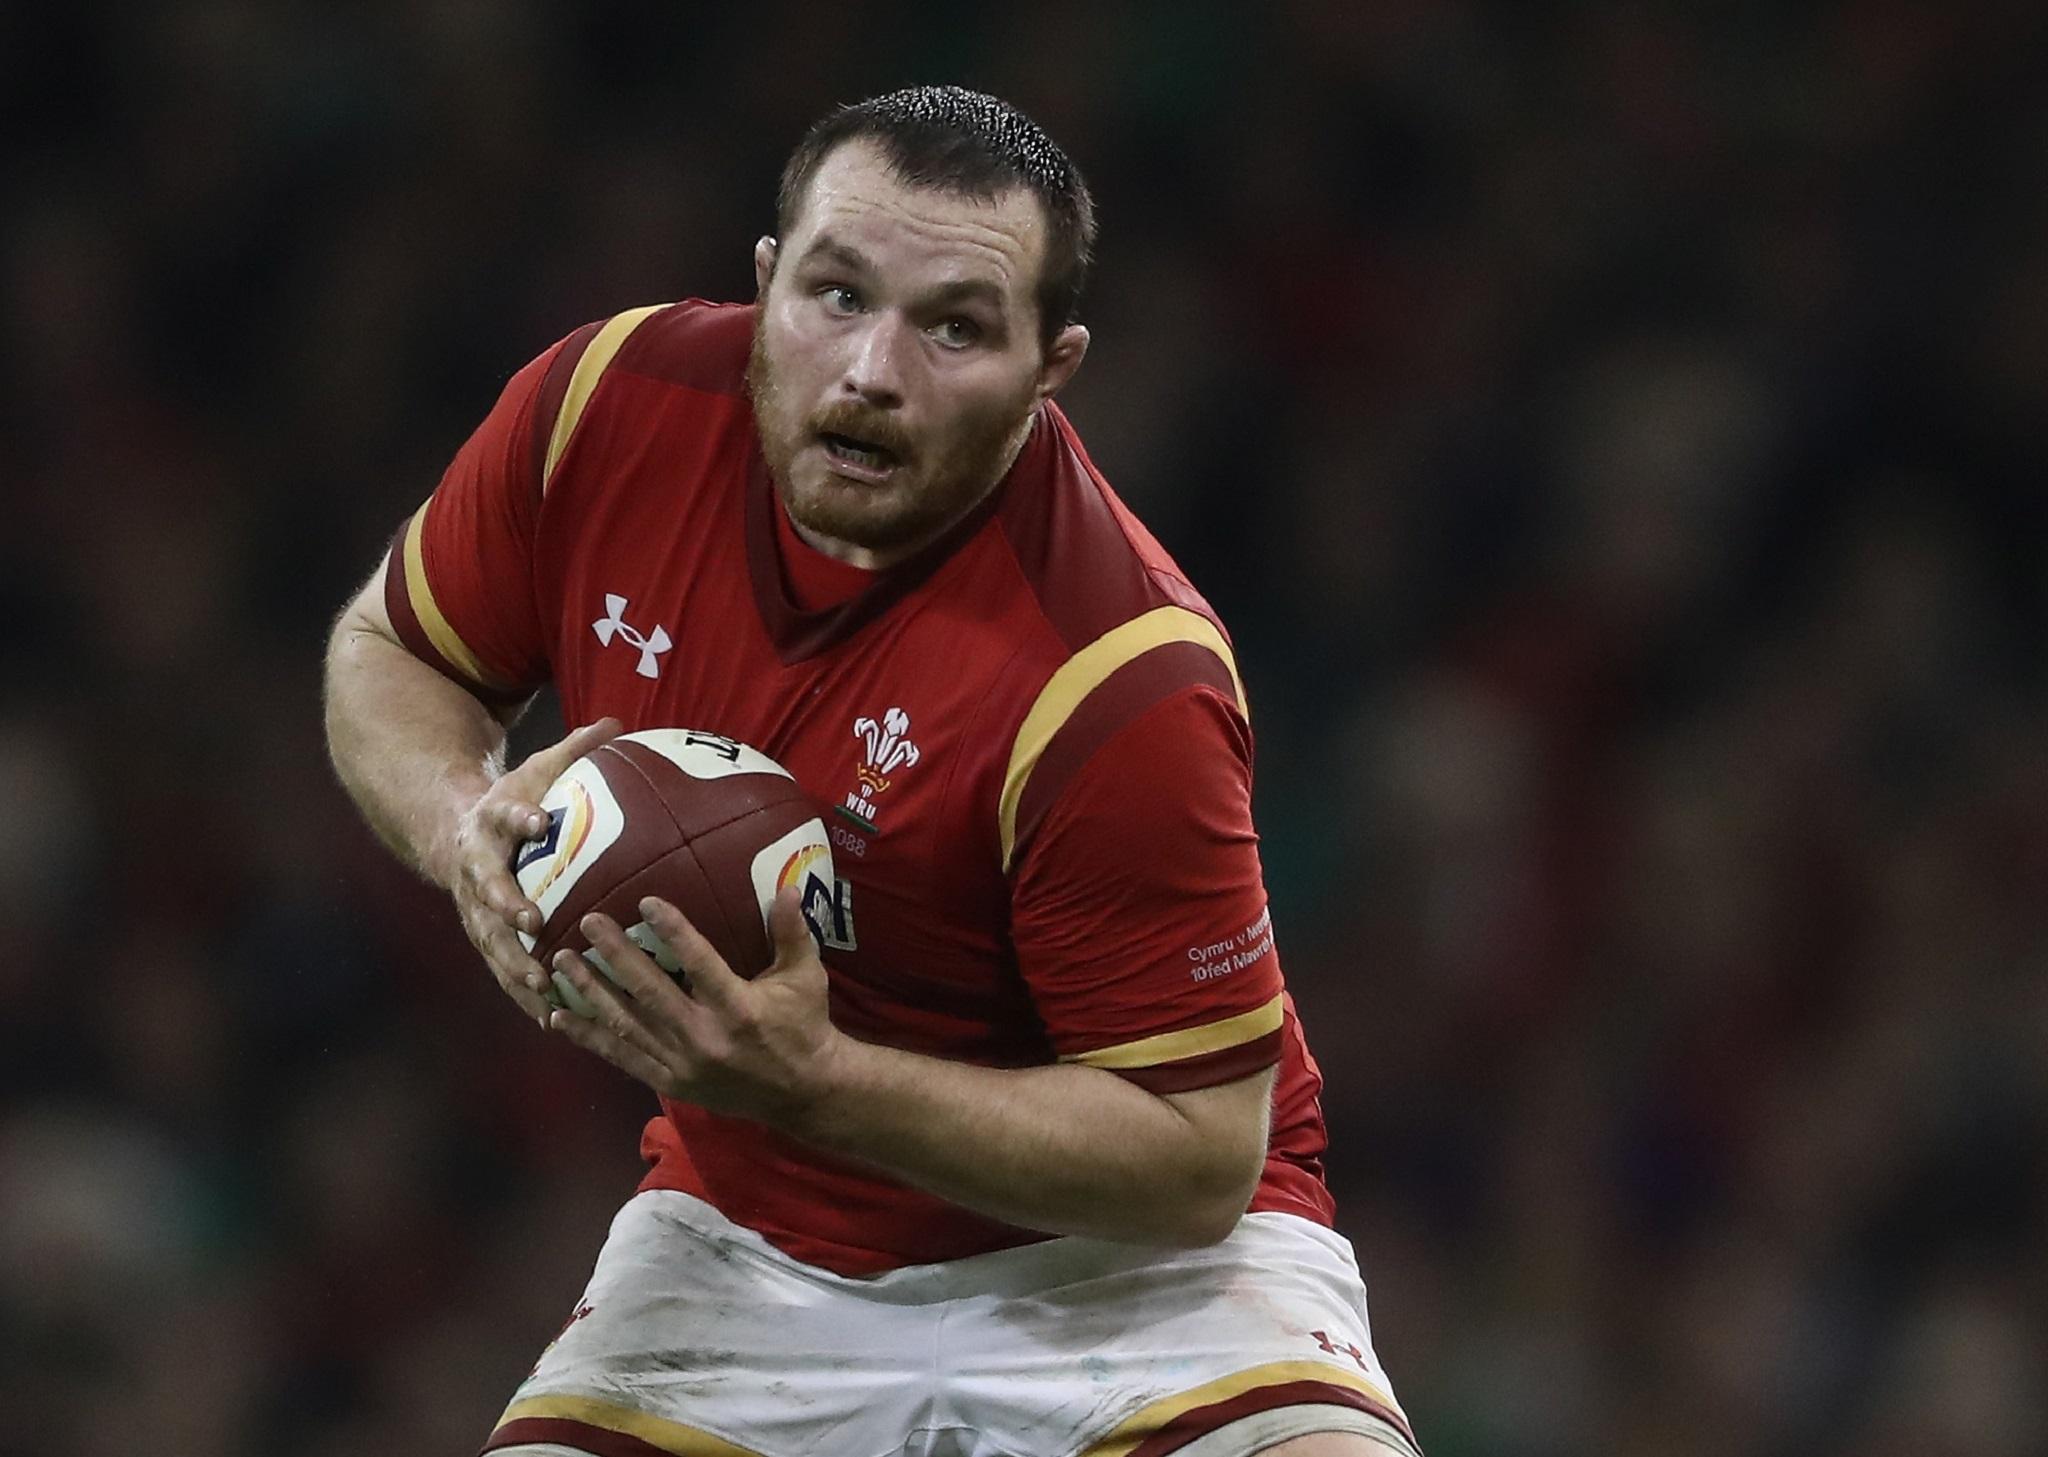 Ken Owens suffered an ankle injury in Scarlets training this week